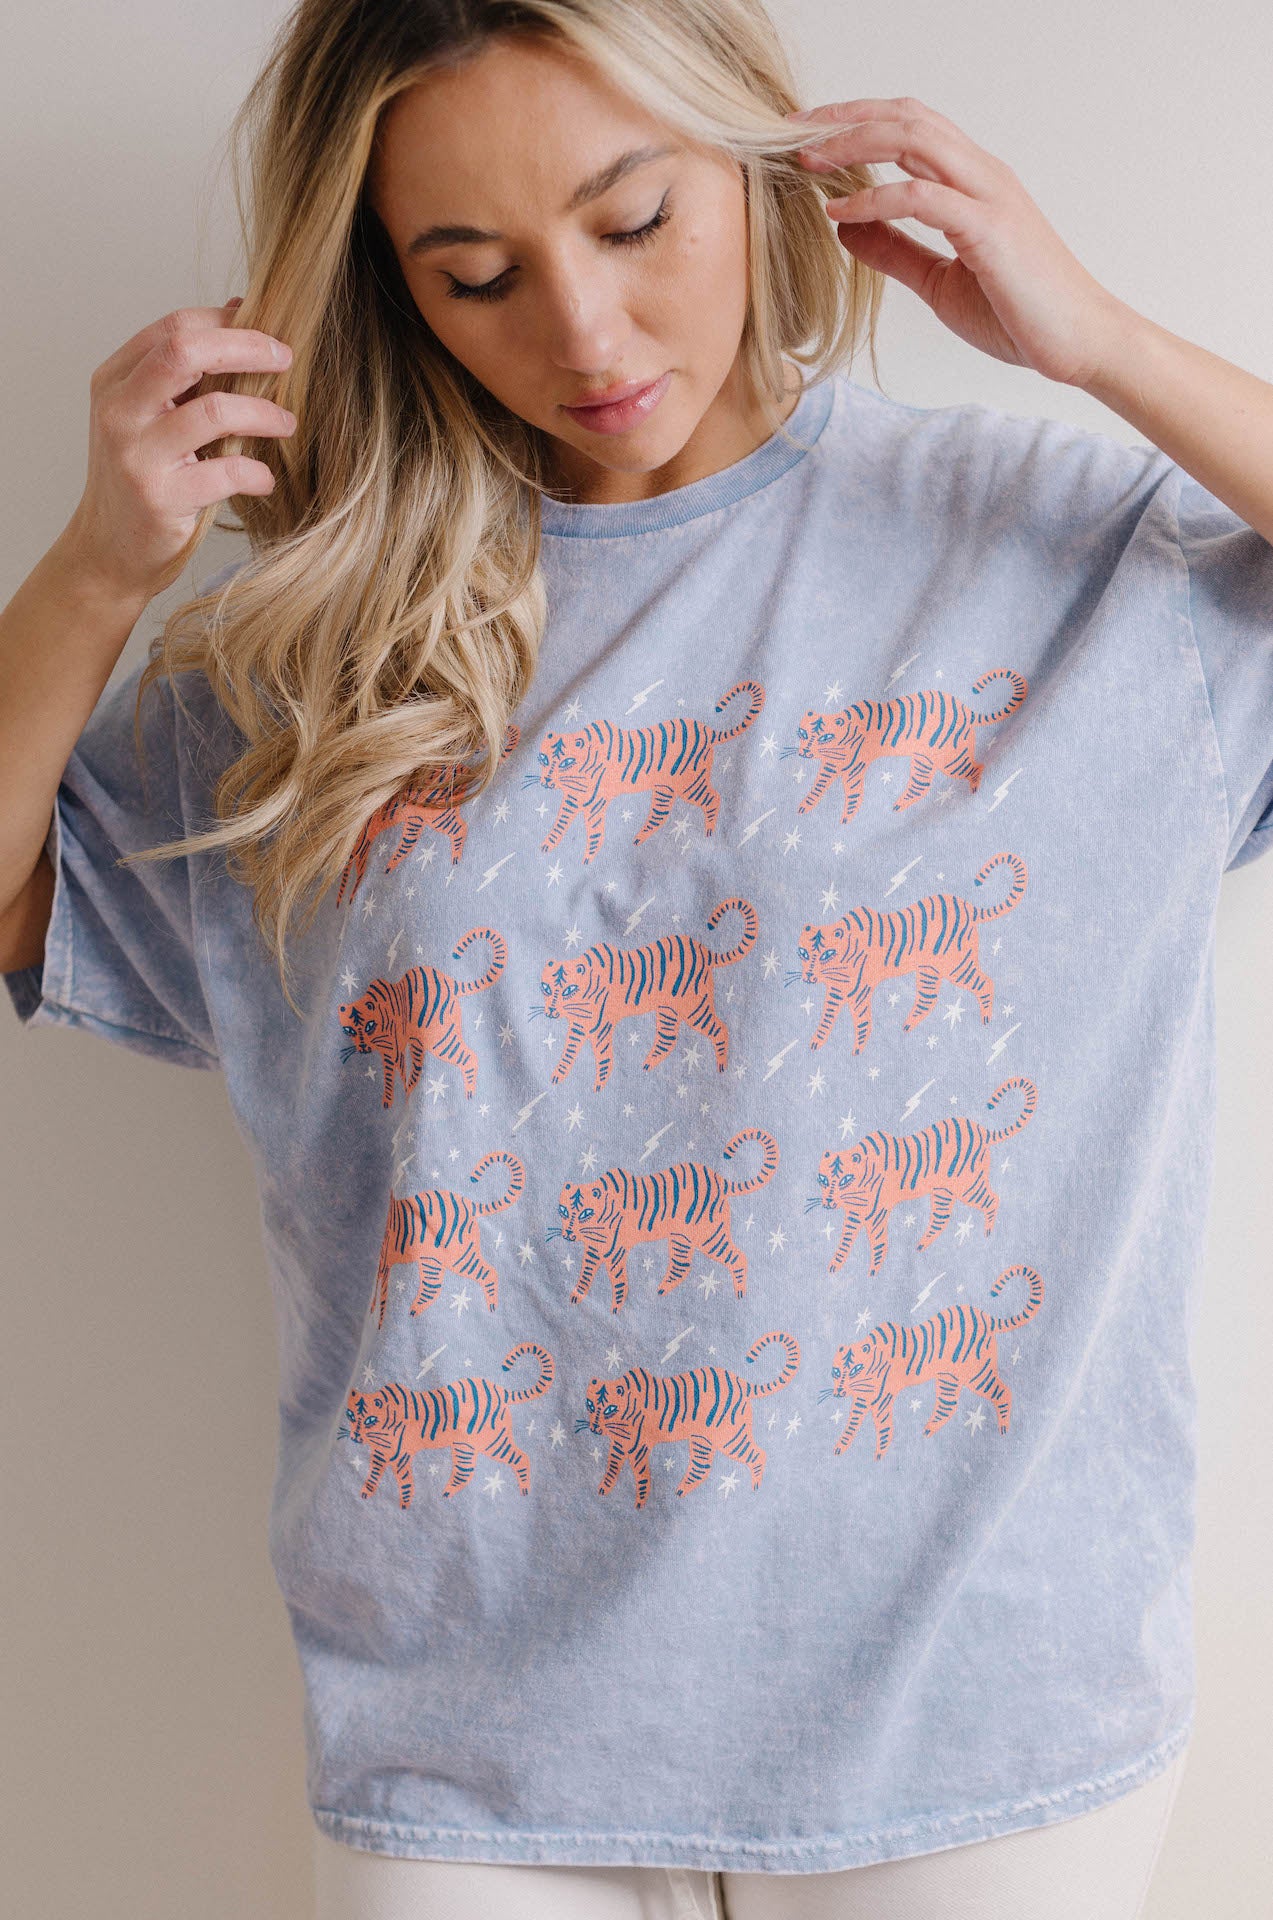 cute tigers graphic tee